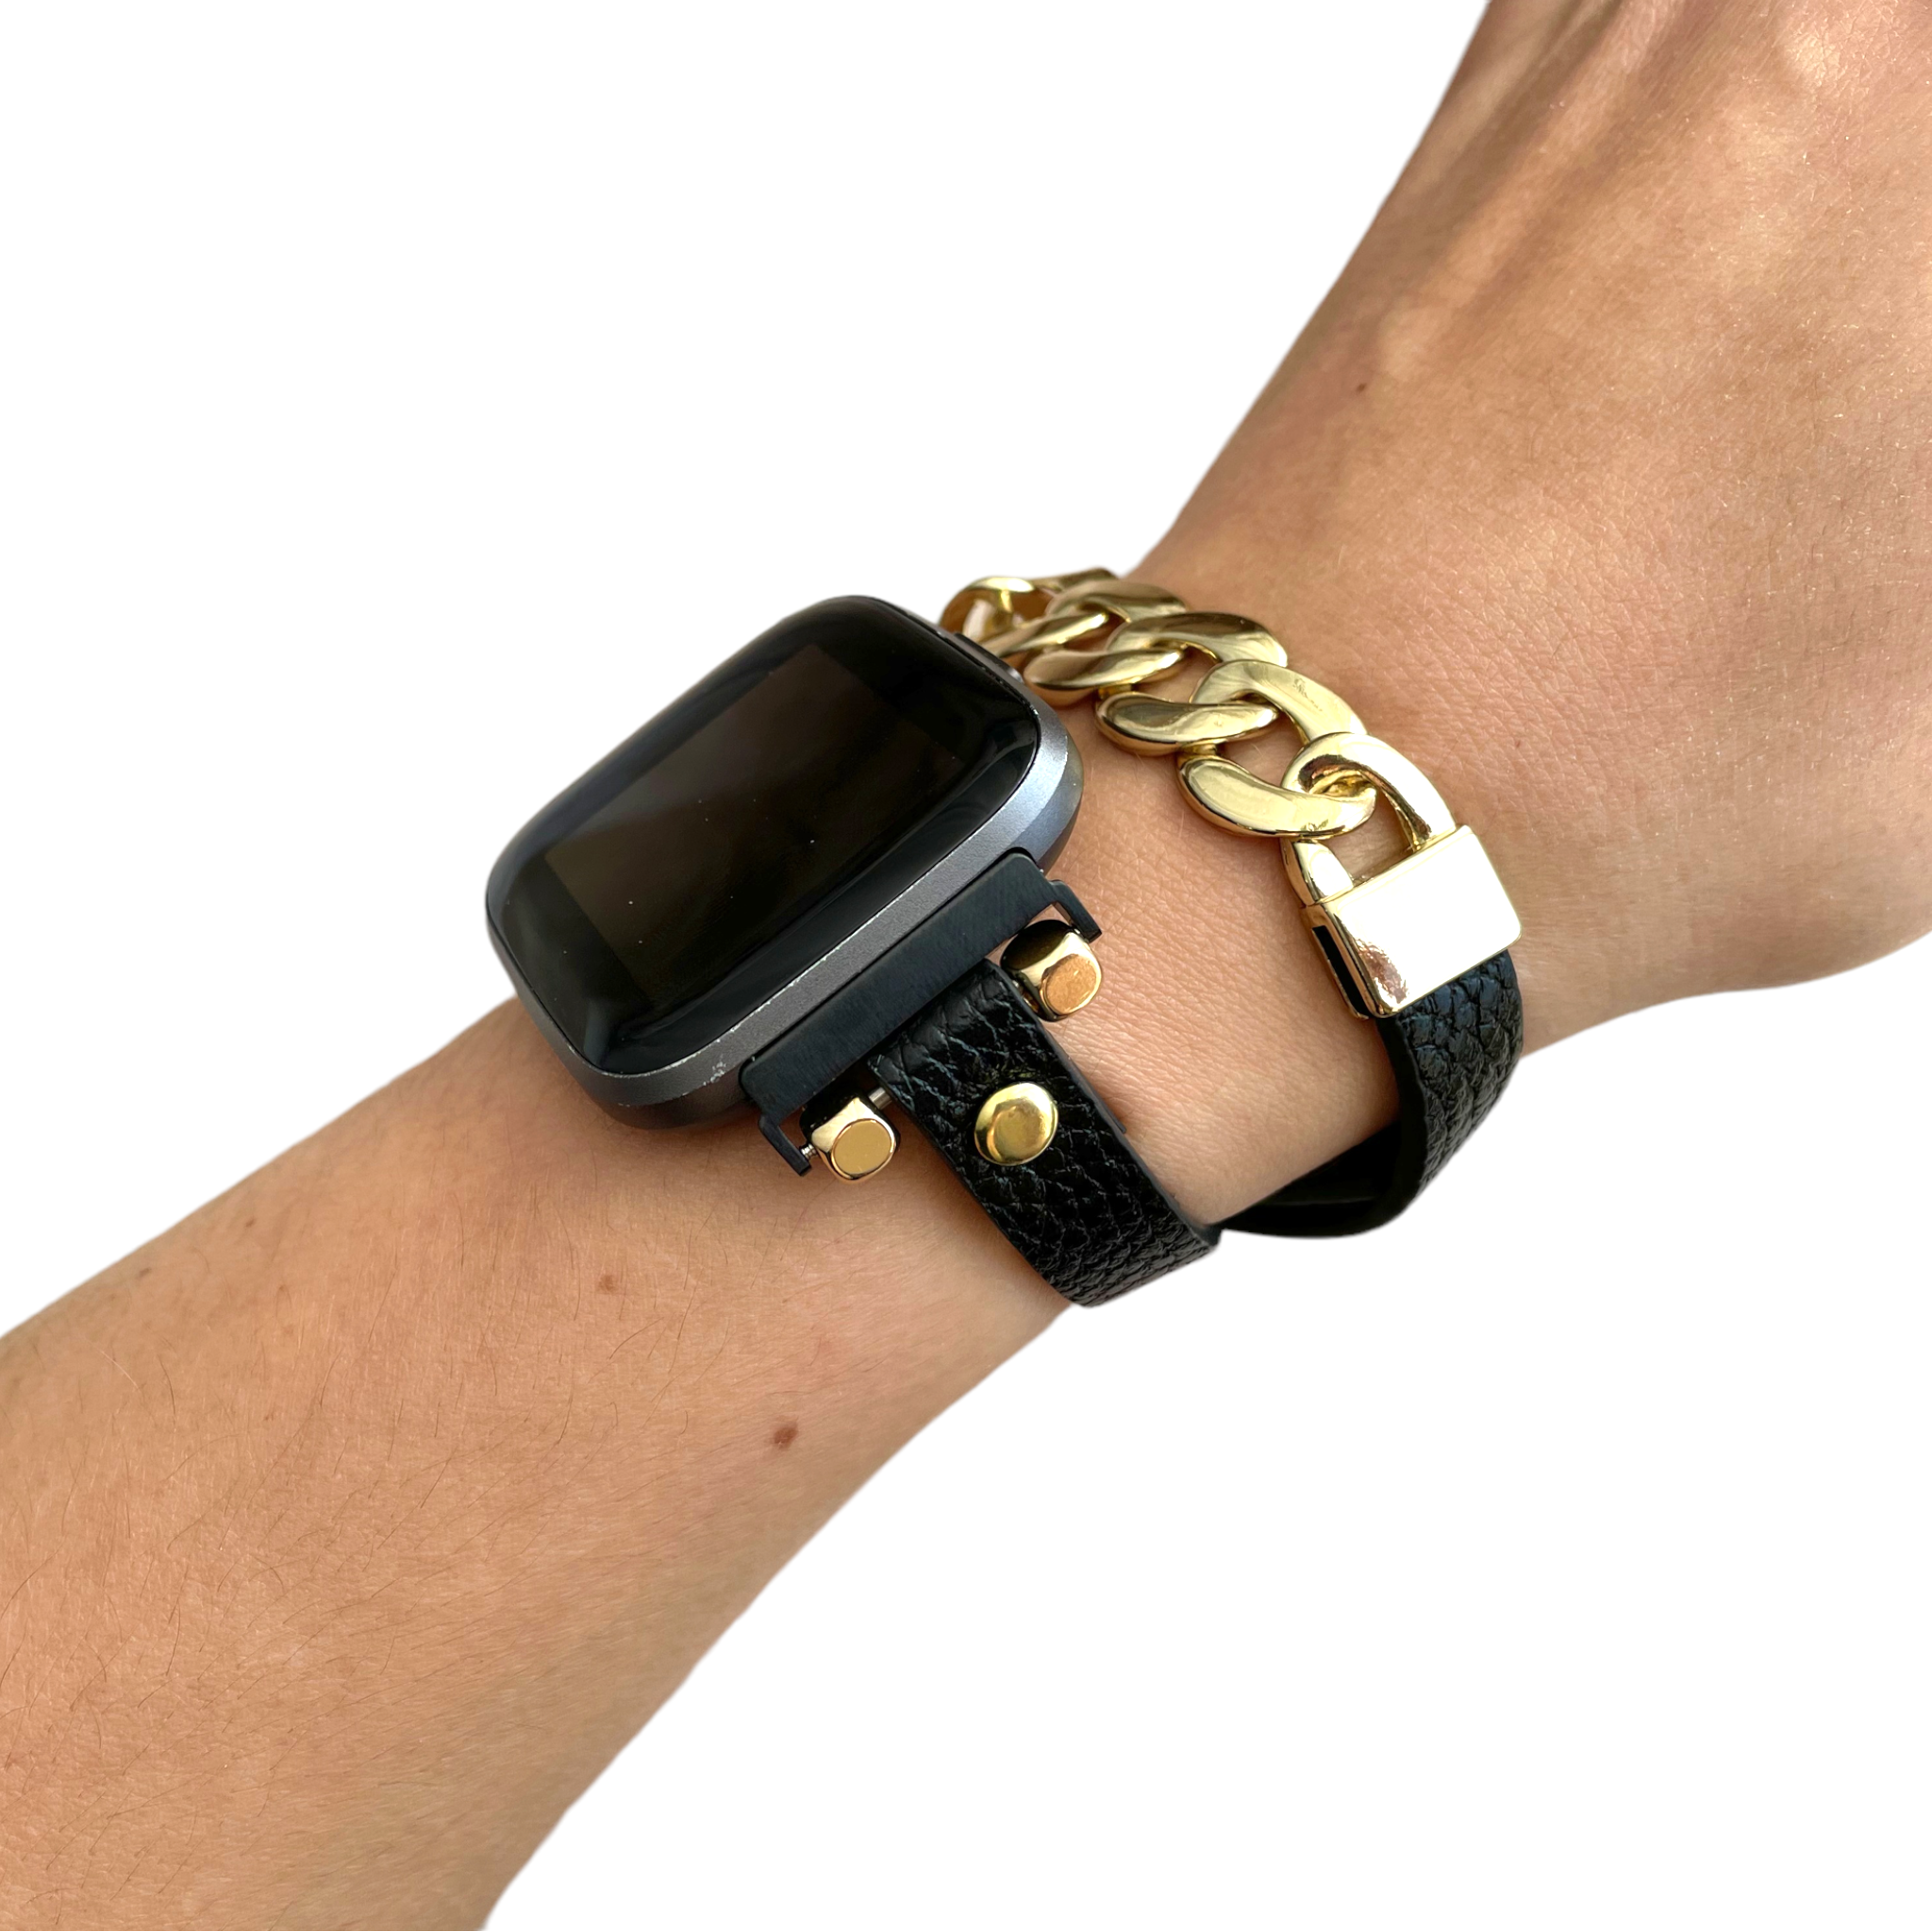 Posh Leather Chain Bracelet Watch Band for Fitbit Versa and Sense